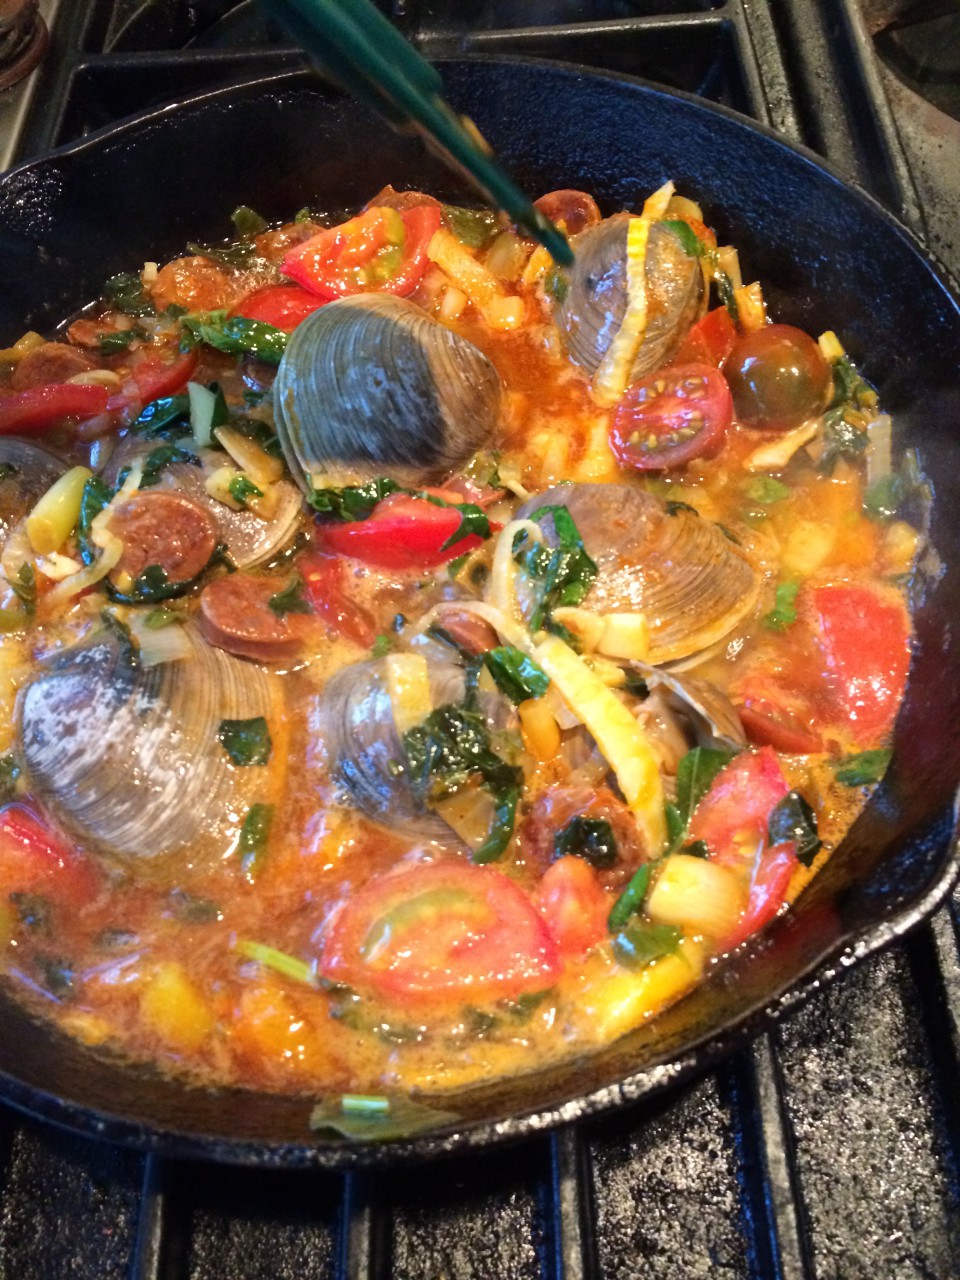 Kathy Gunst cooks her "Summer Clams with Chorizo, Tomatoes and Basil." (Kathy Gunst)